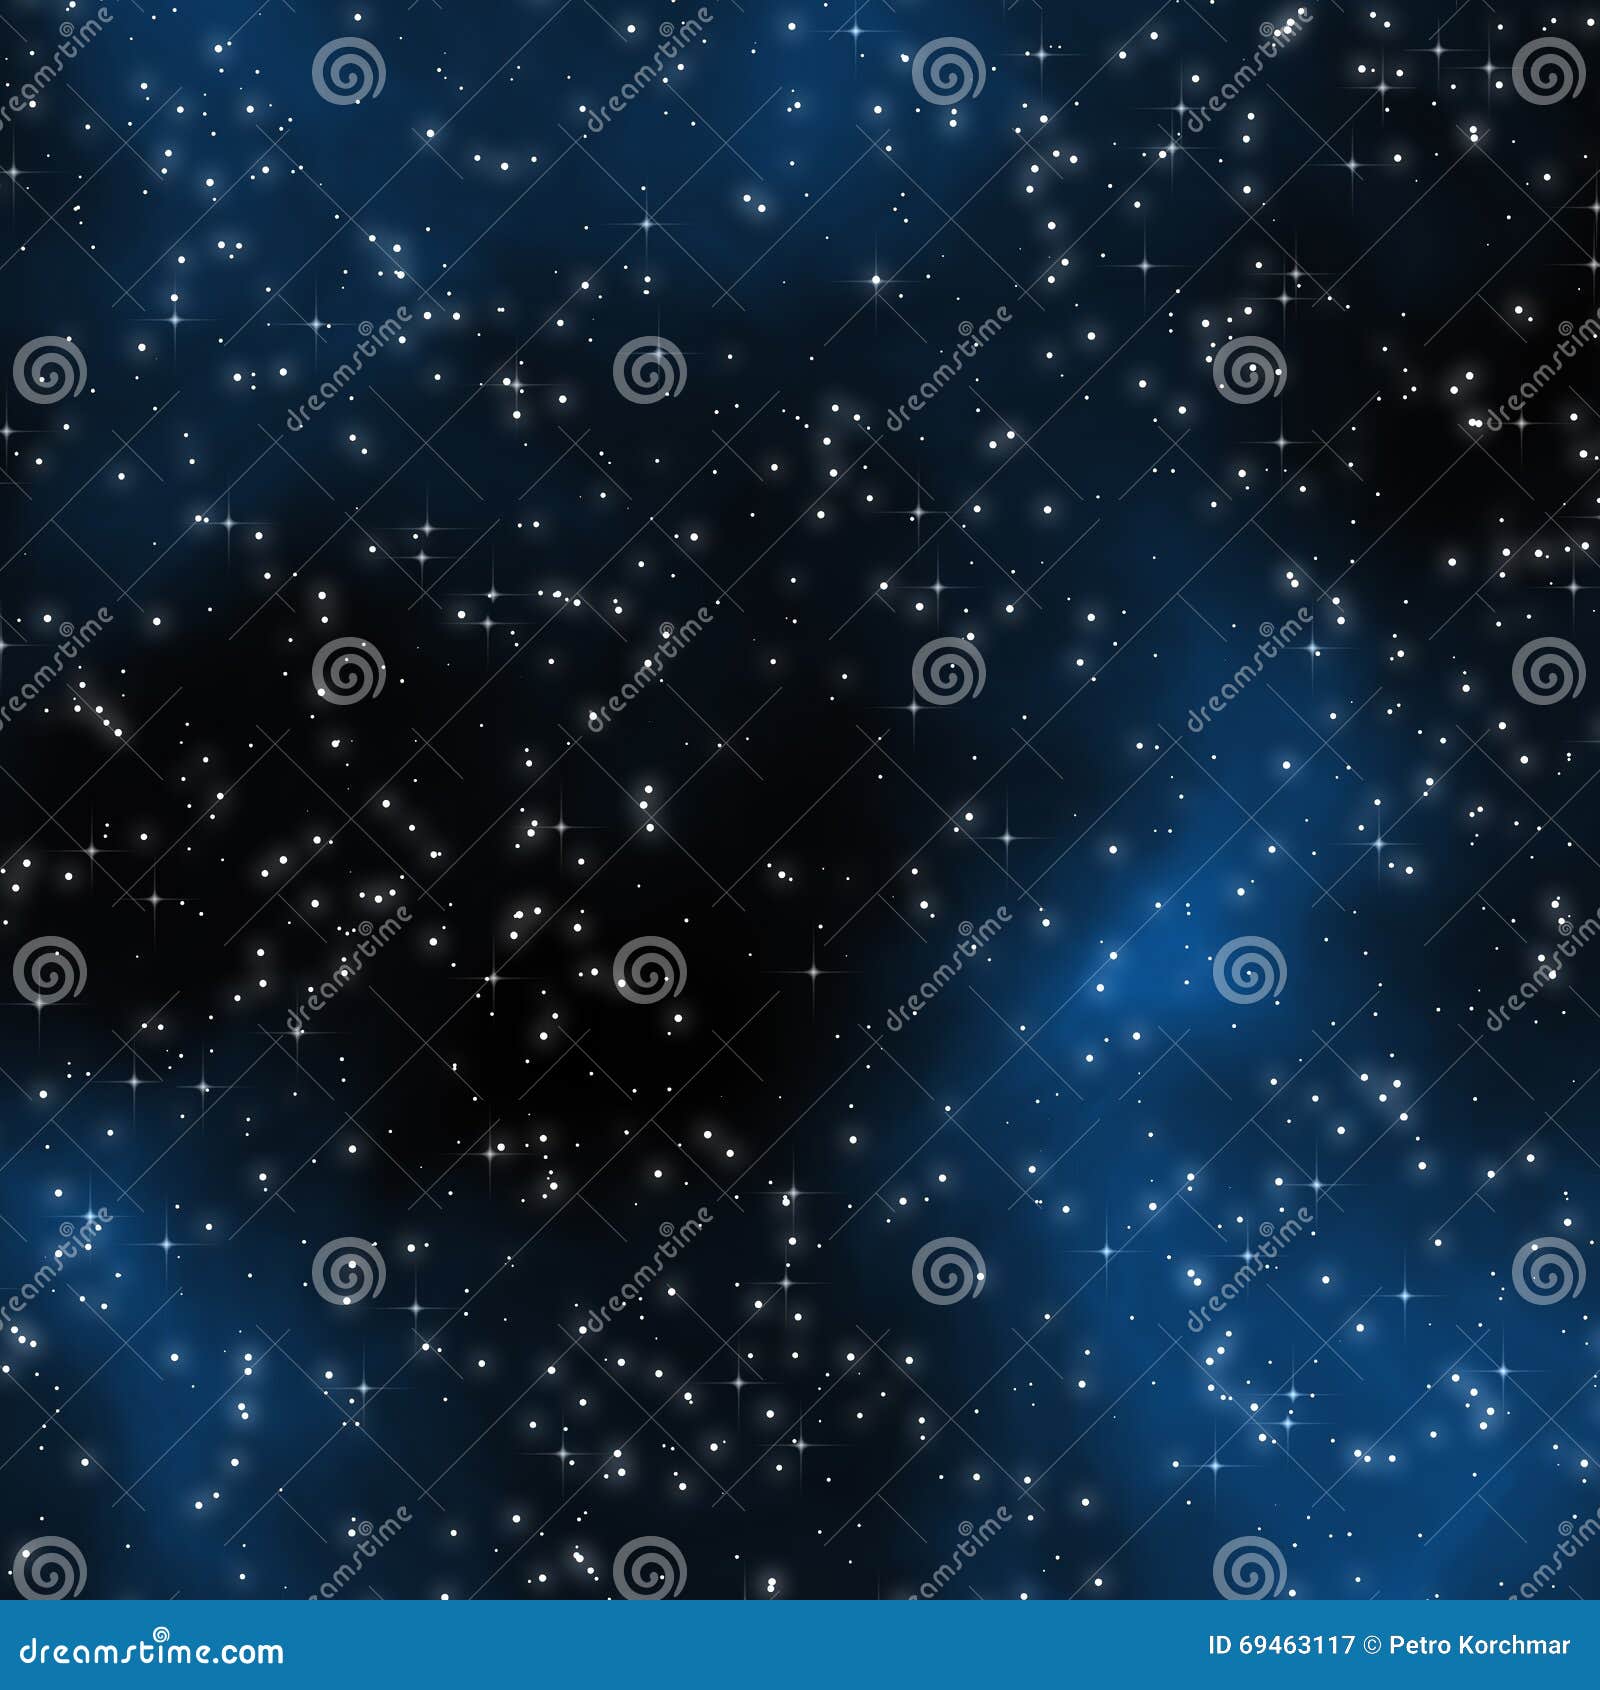 seamless starfield with glowing stars at night